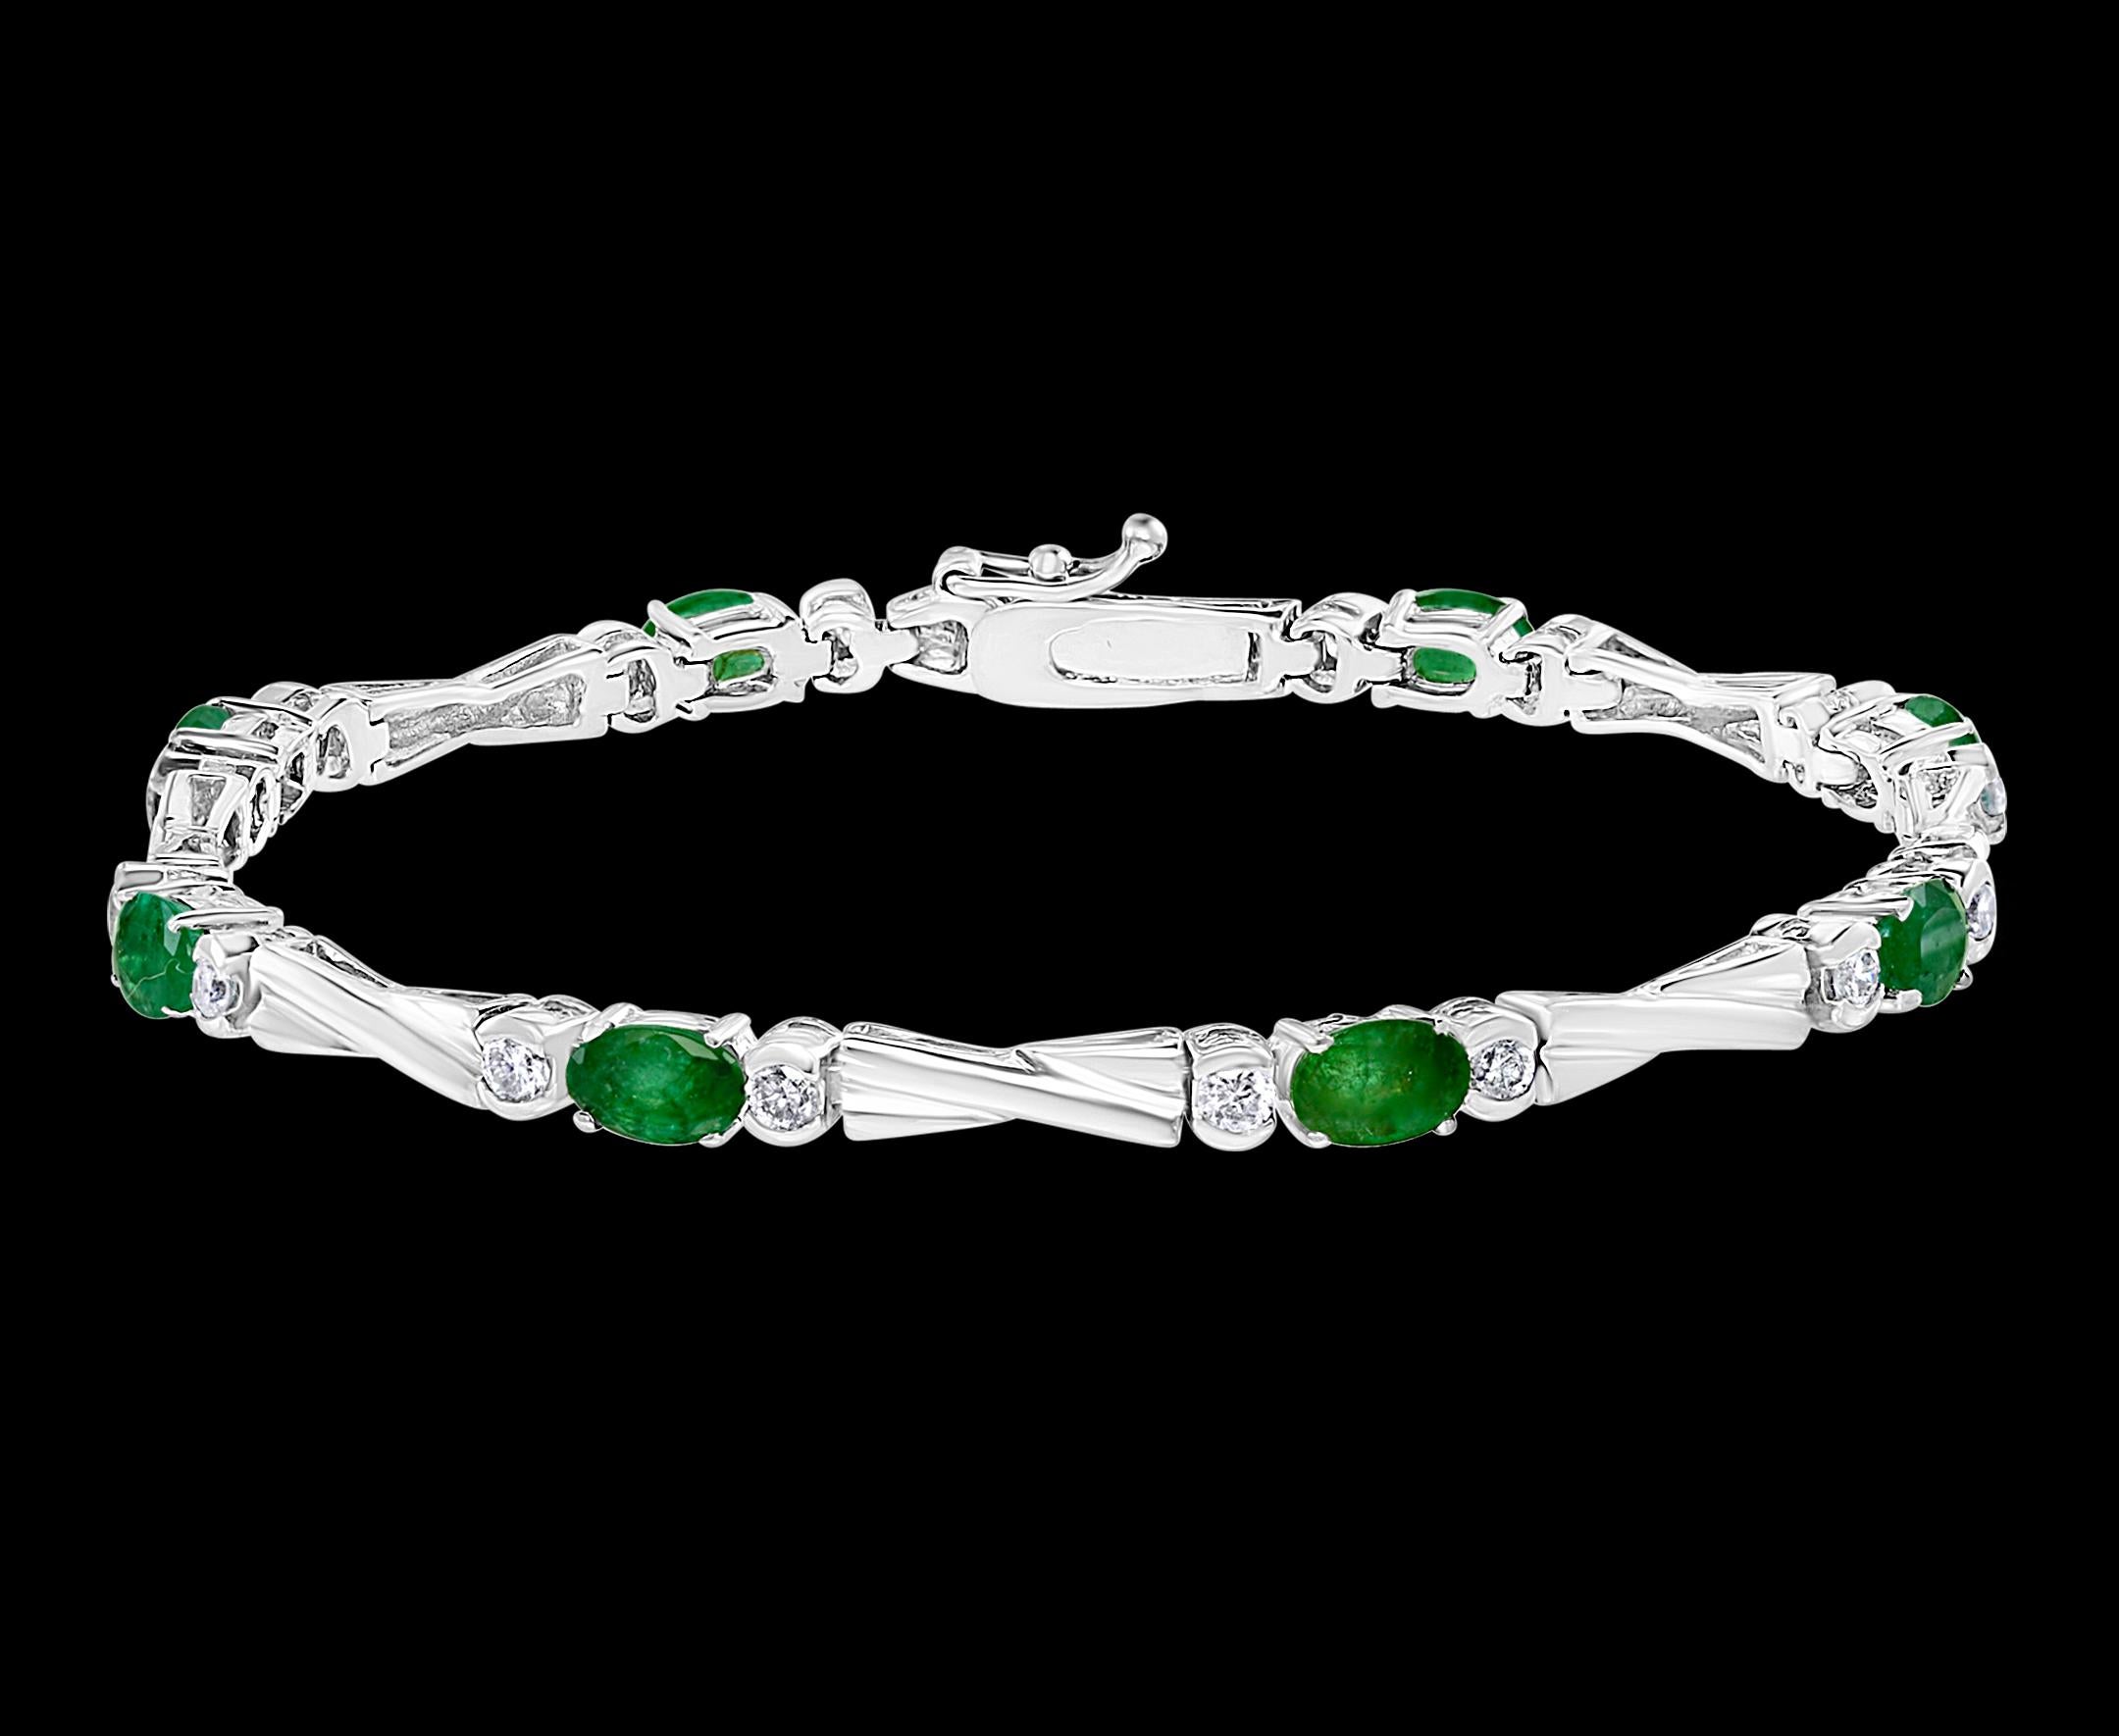  This exceptionally affordable Tennis  bracelet has  8 stones of oval  Emeralds  . Each Emerald has one diamond on each side of the emerald .Total weight of Emerald is 5.5 carat. Total number of diamonds are 16 and diamond weighs 1 ct.
The bracelet